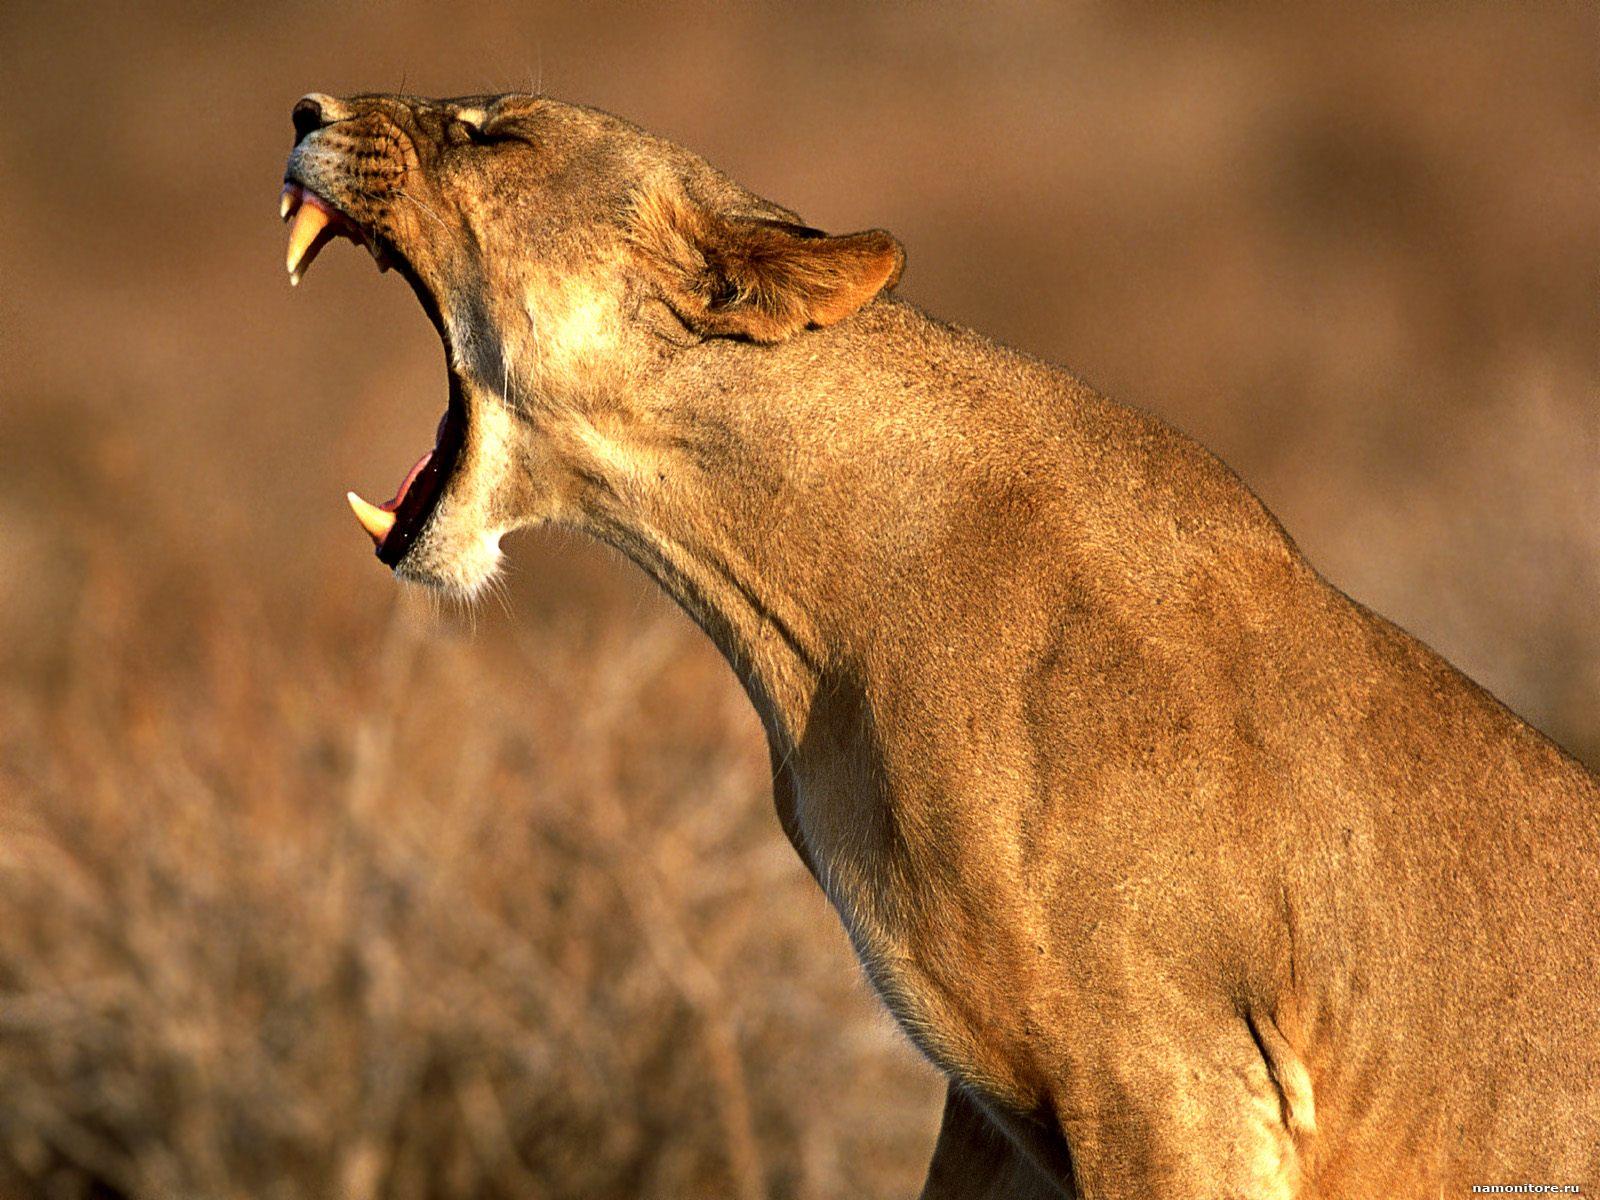 The lioness is yawning